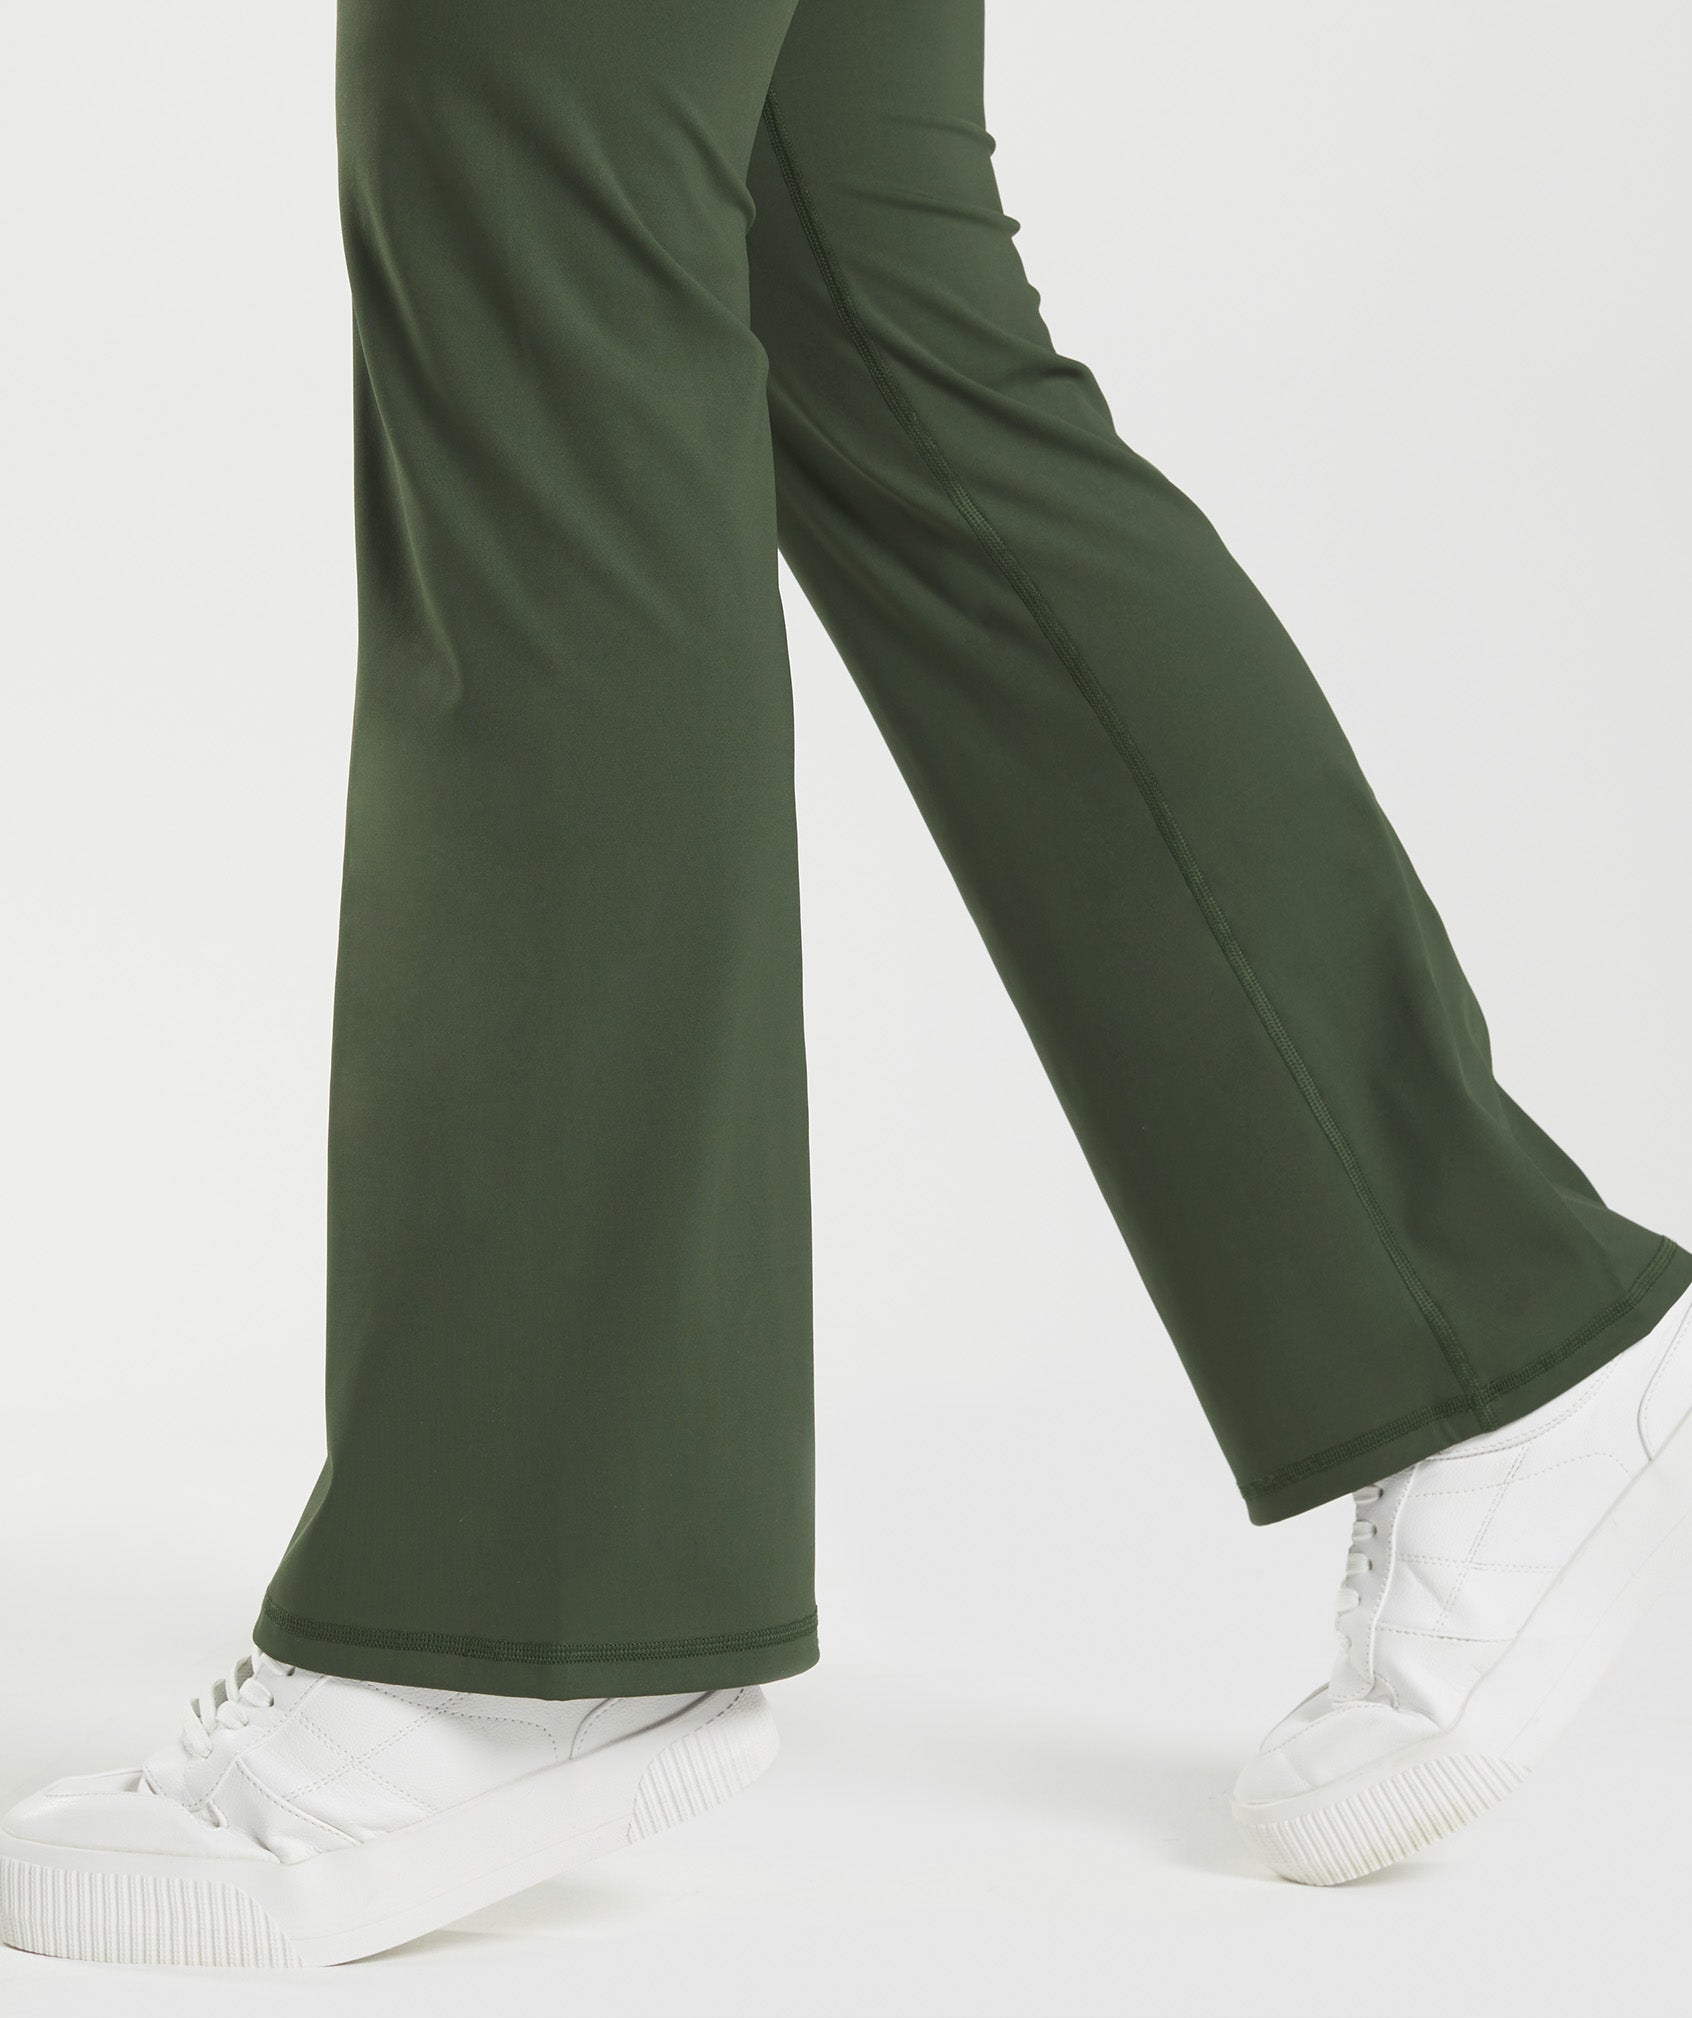 Elevate Flared Leggings in Moss Olive - view 6